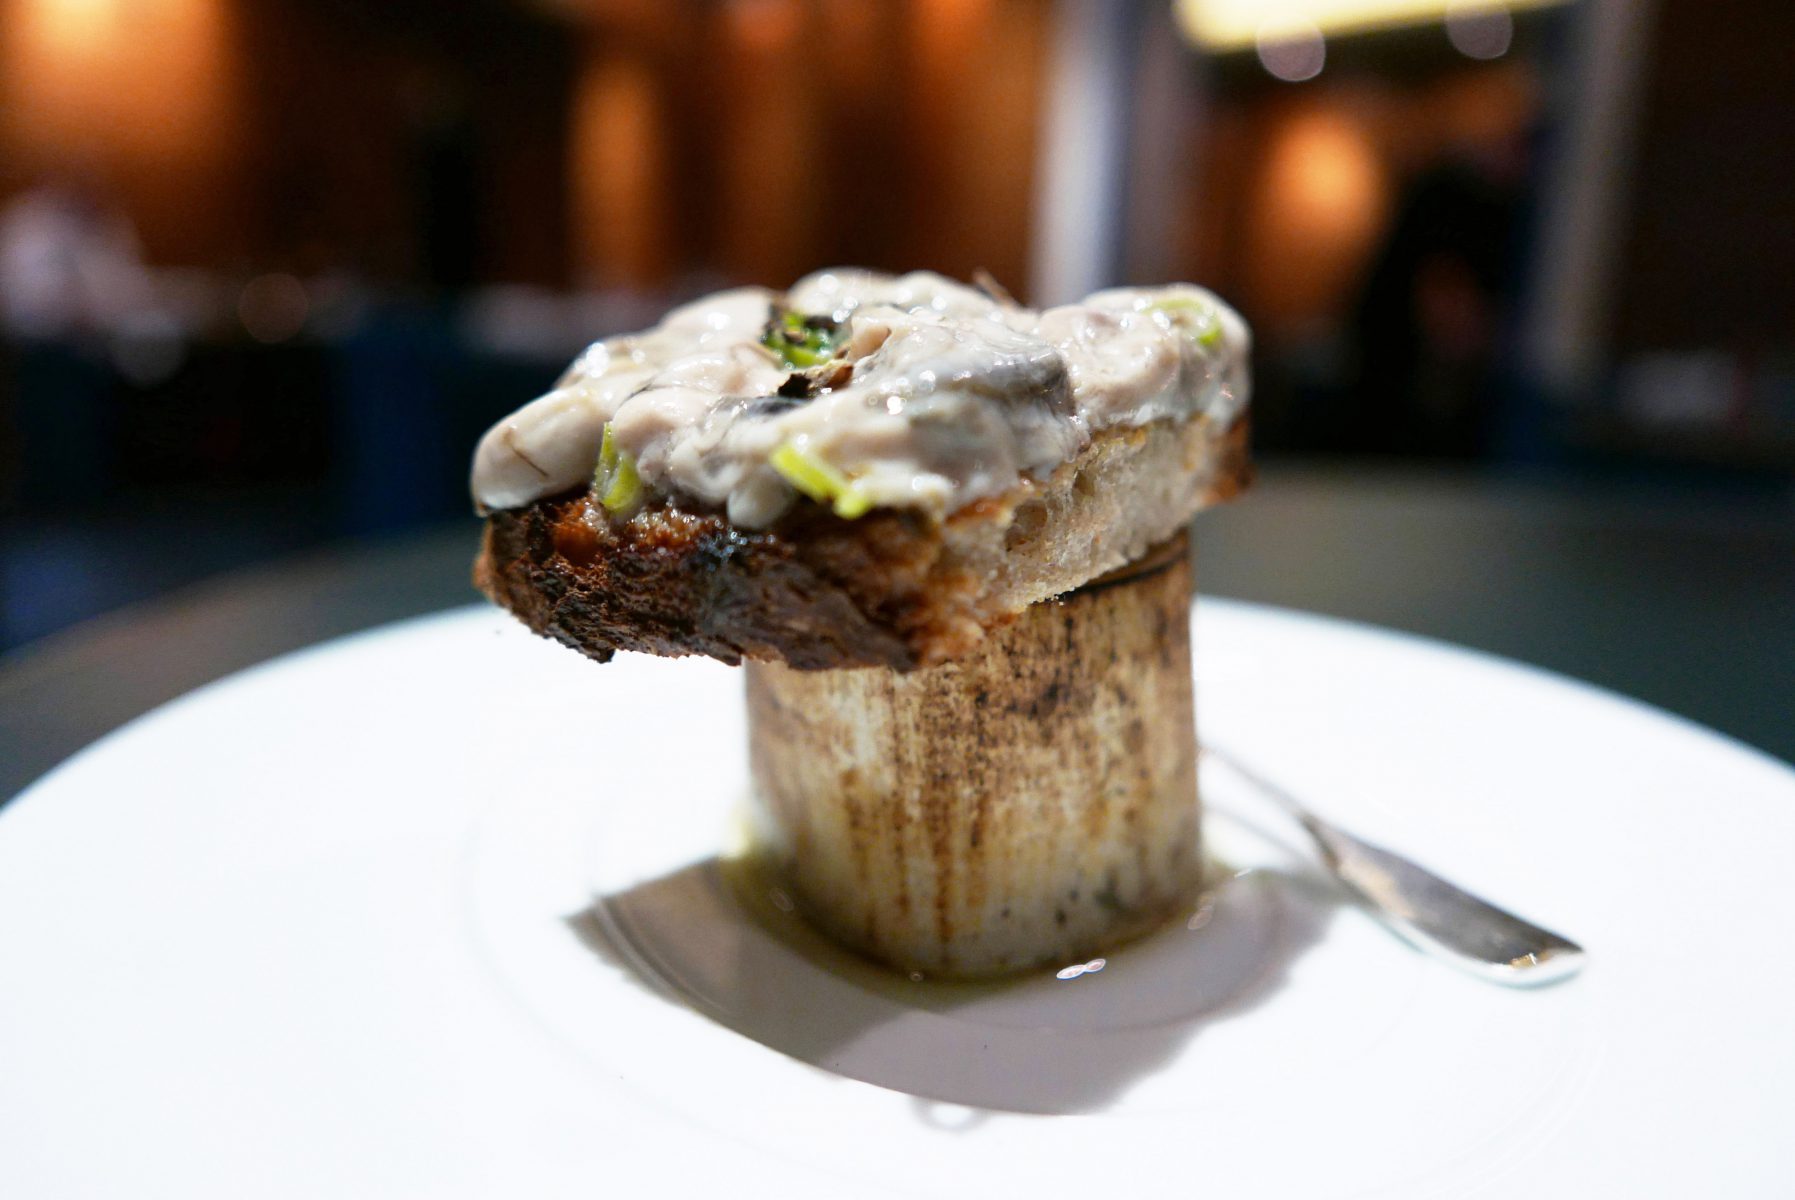 Oyster toast served on a bone with its marrow. You had to mix both ingredients . A-ma-zing